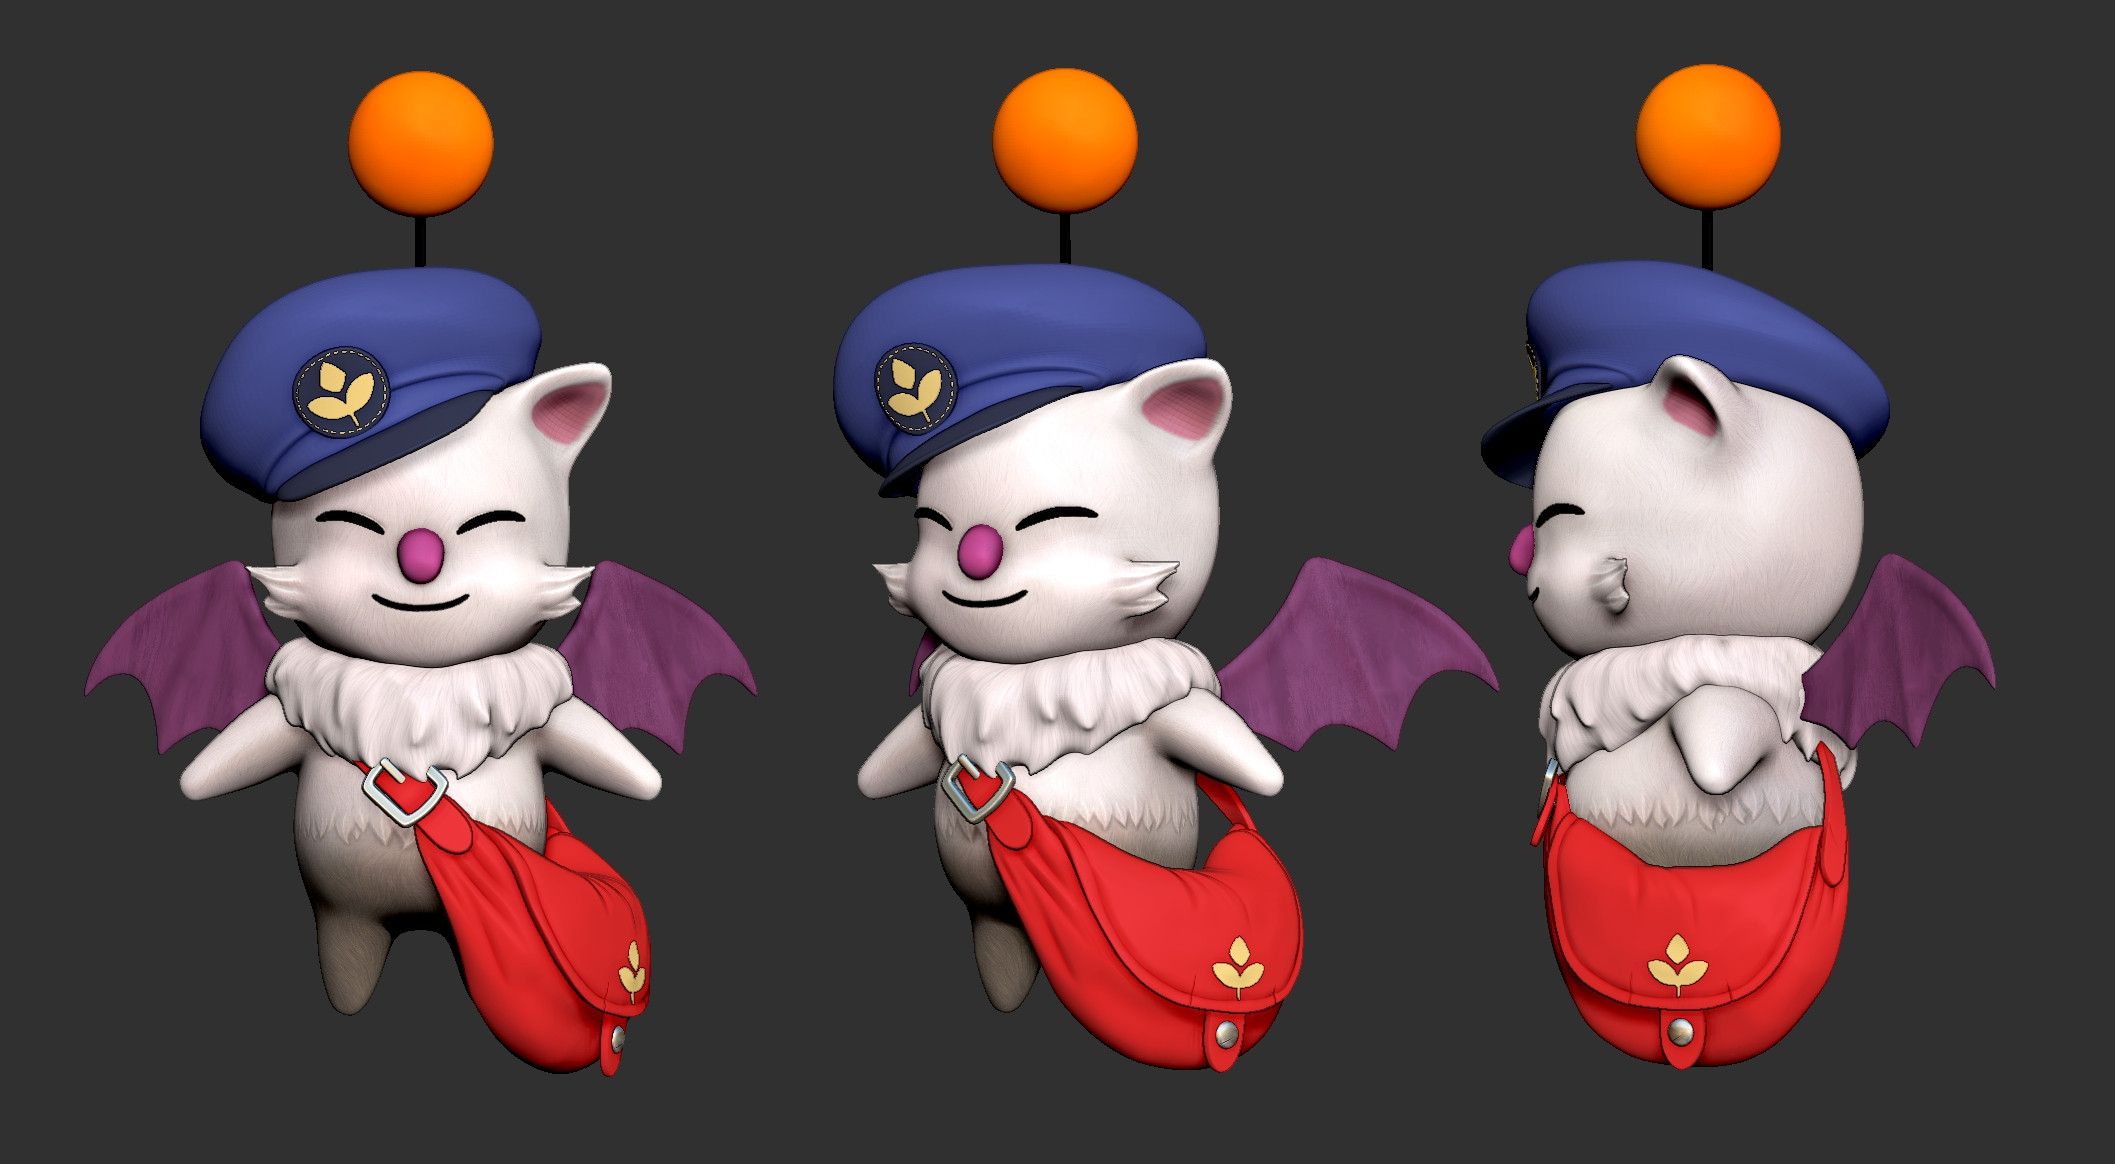 This was a costume variant that didn't get finished for the delivery moogle